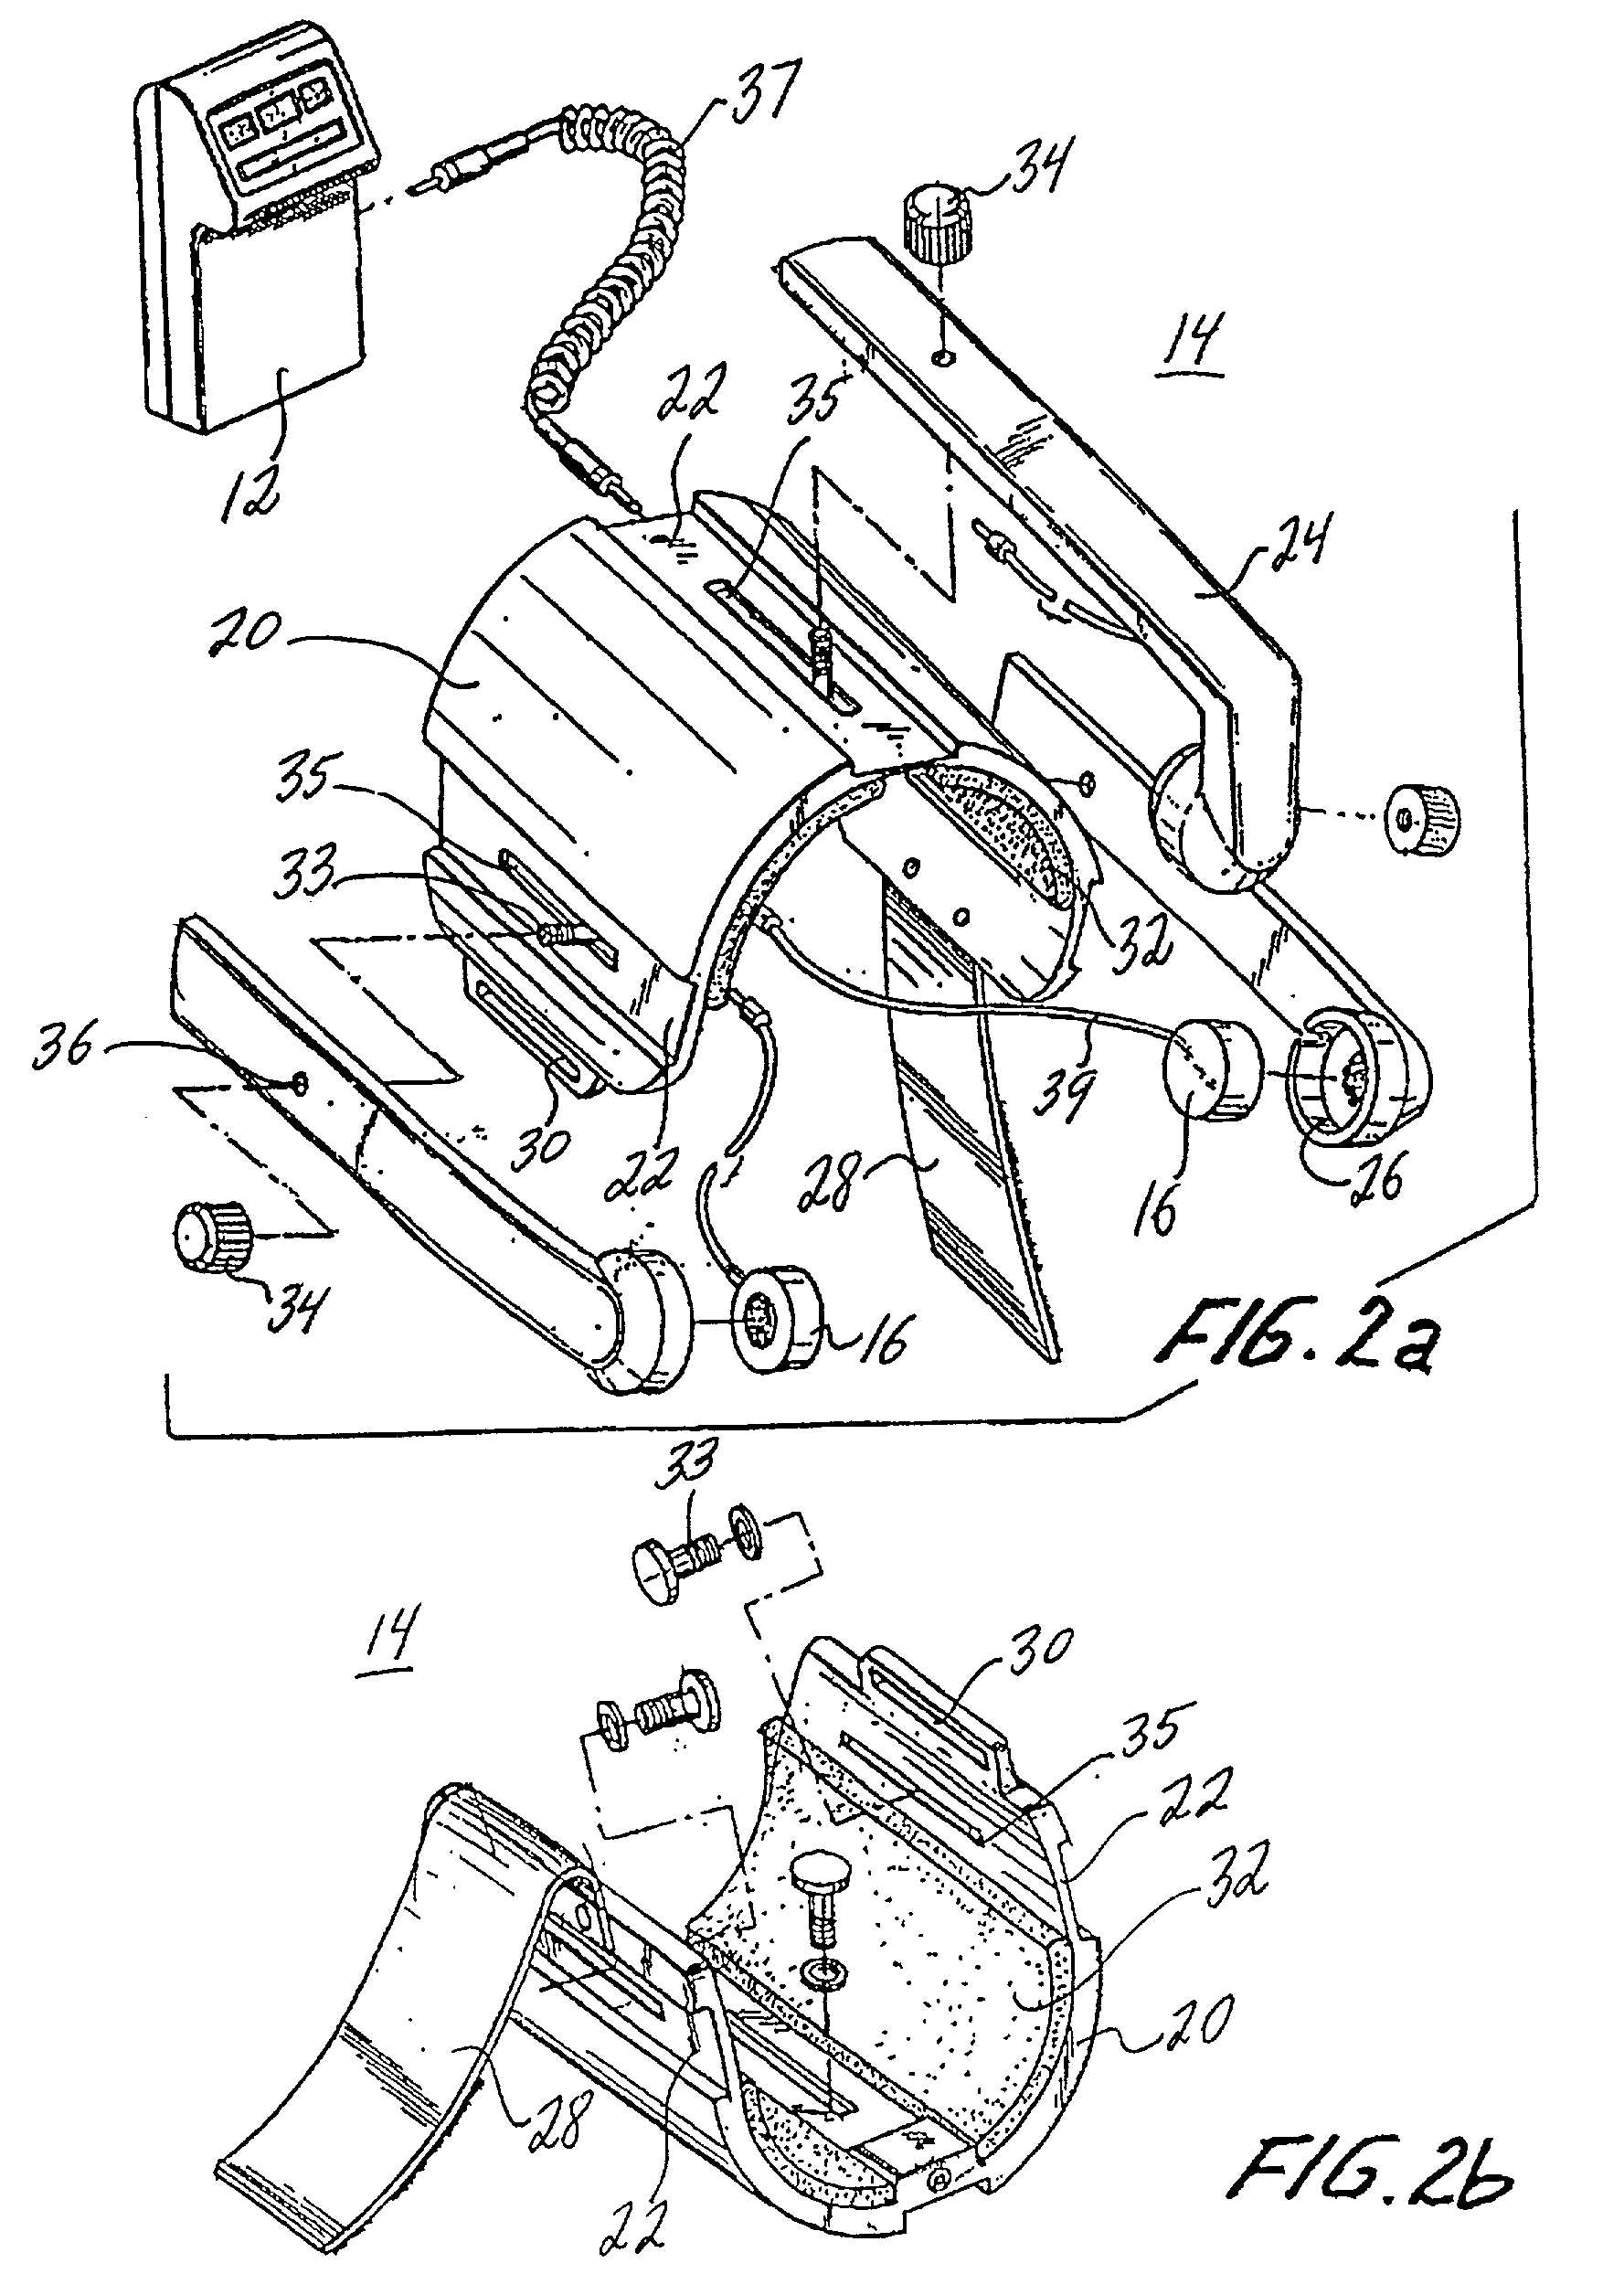 Method and apparatus for connective tissue treatment